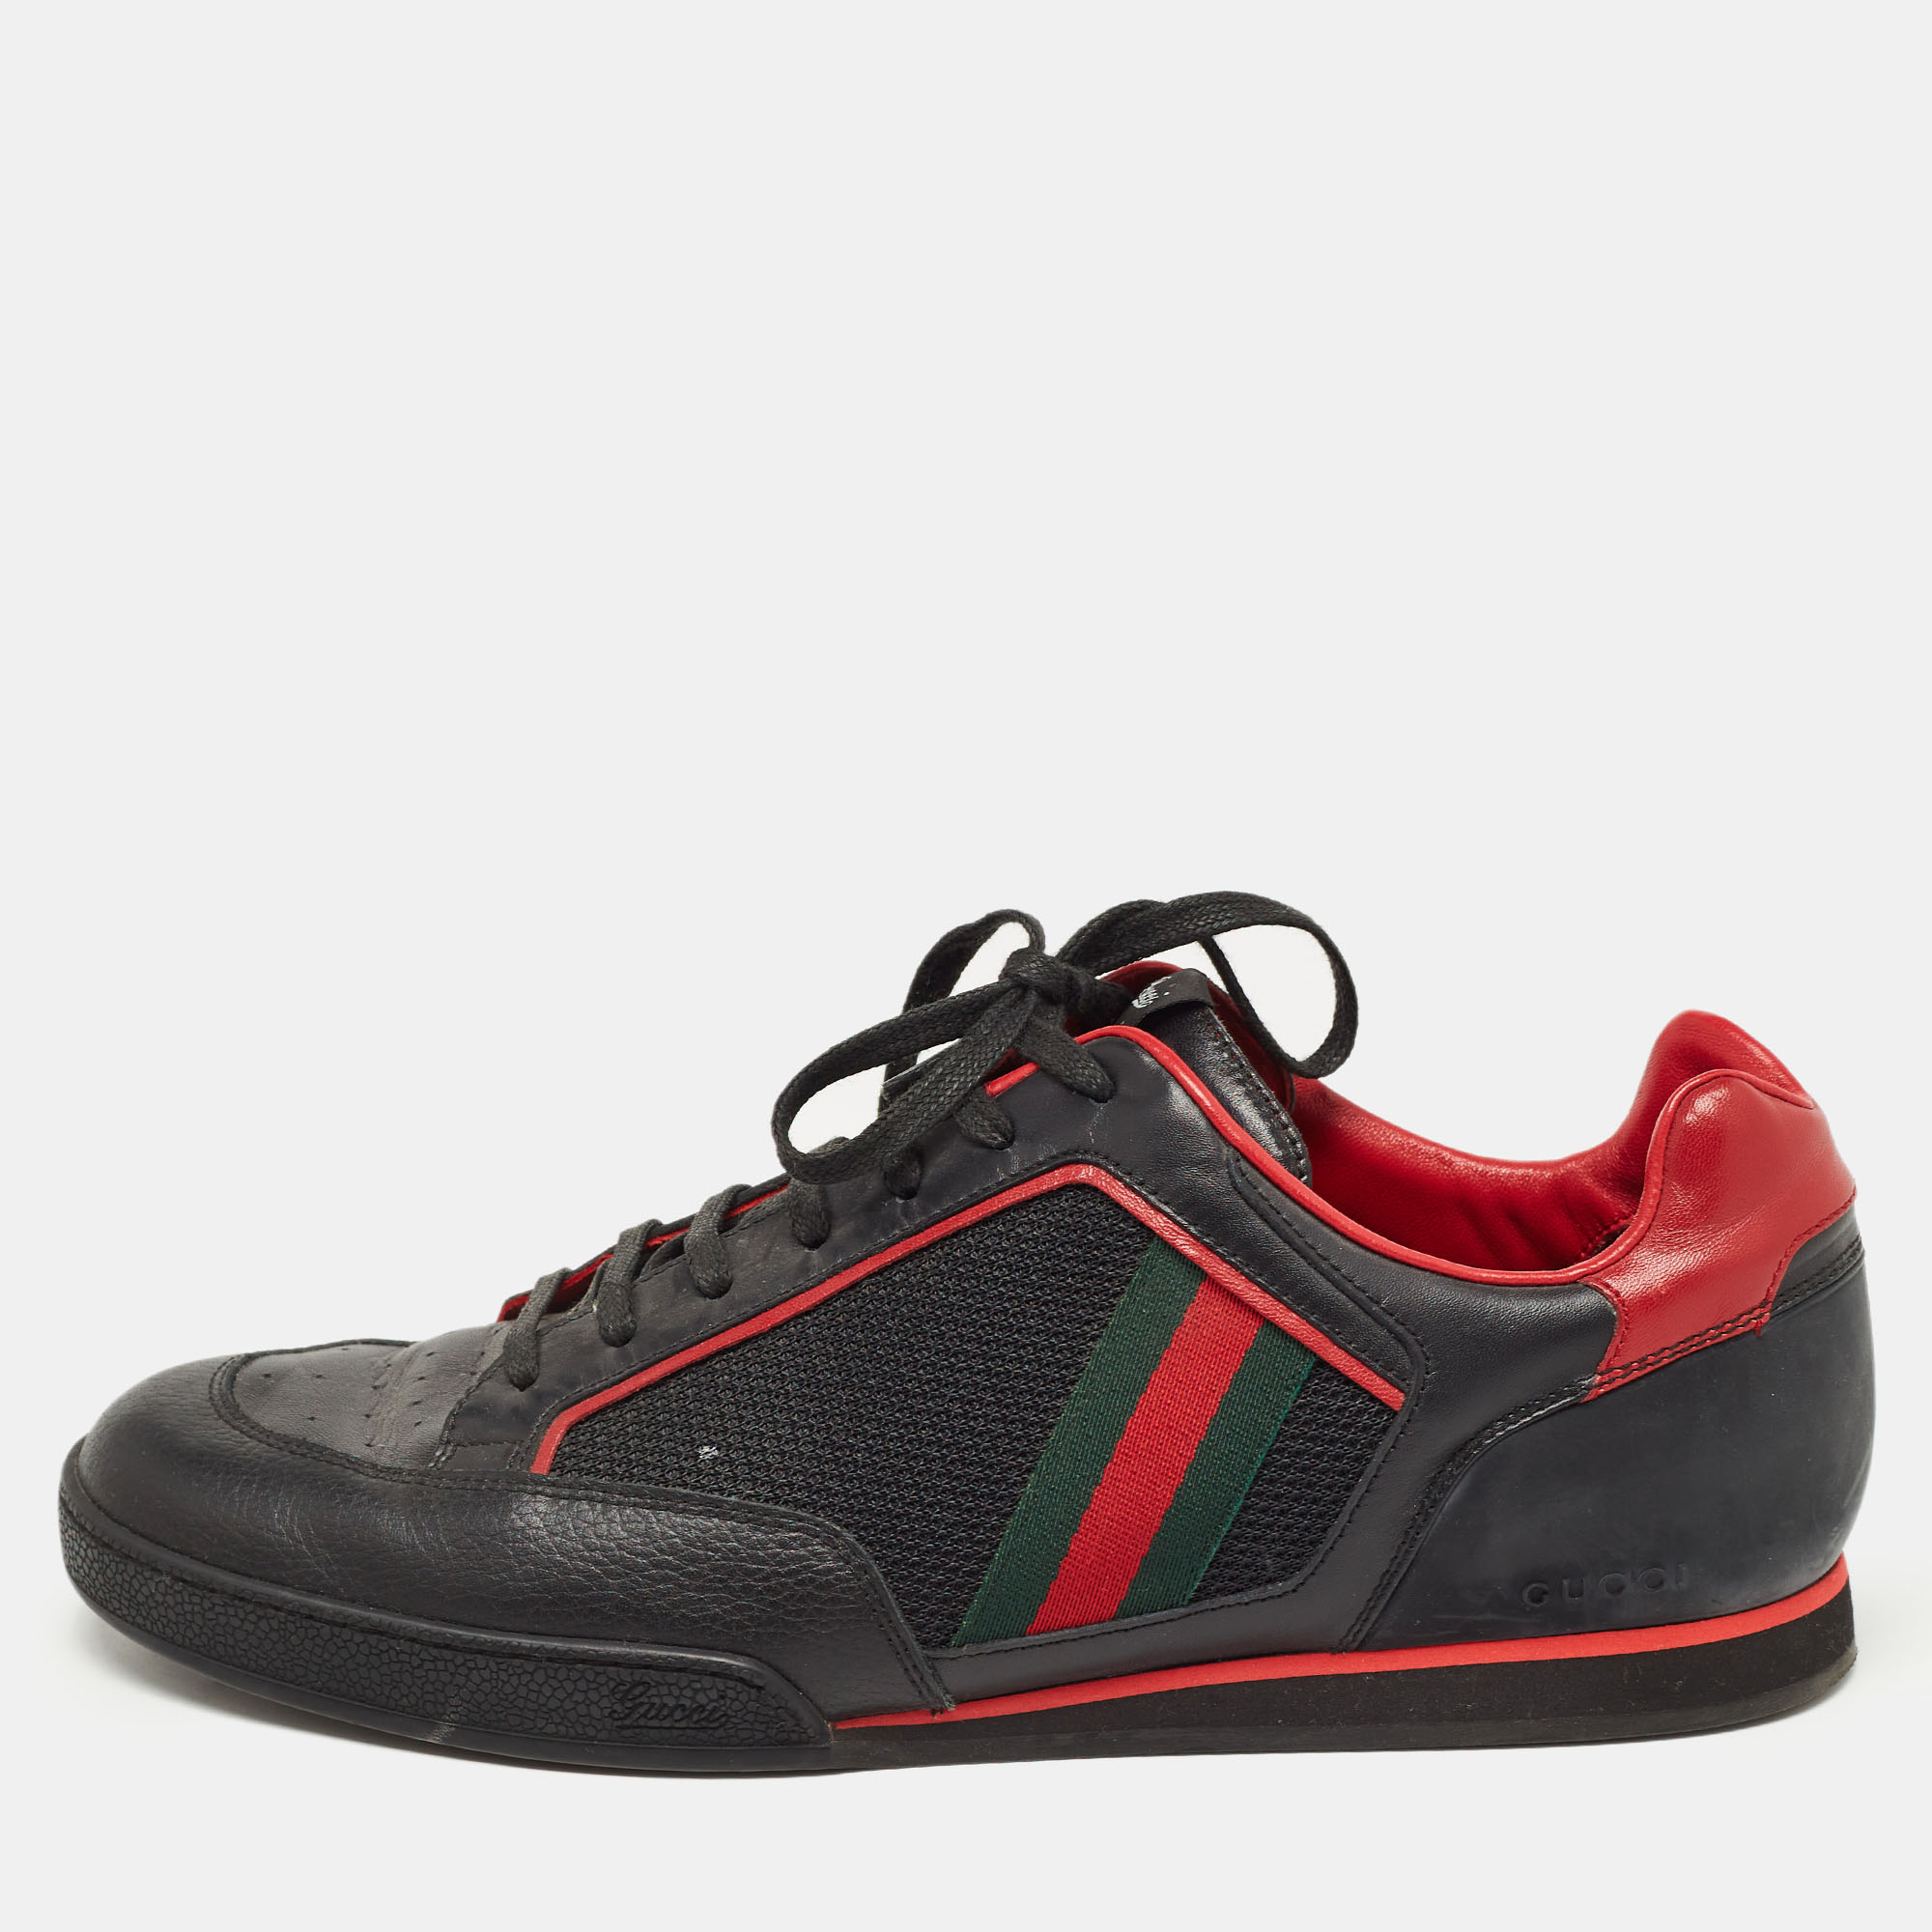 Step into fashion forward luxury with these Gucci sneakers. These premium kicks offer a harmonious blend of style and comfort perfect for those who demand sophistication in every step.